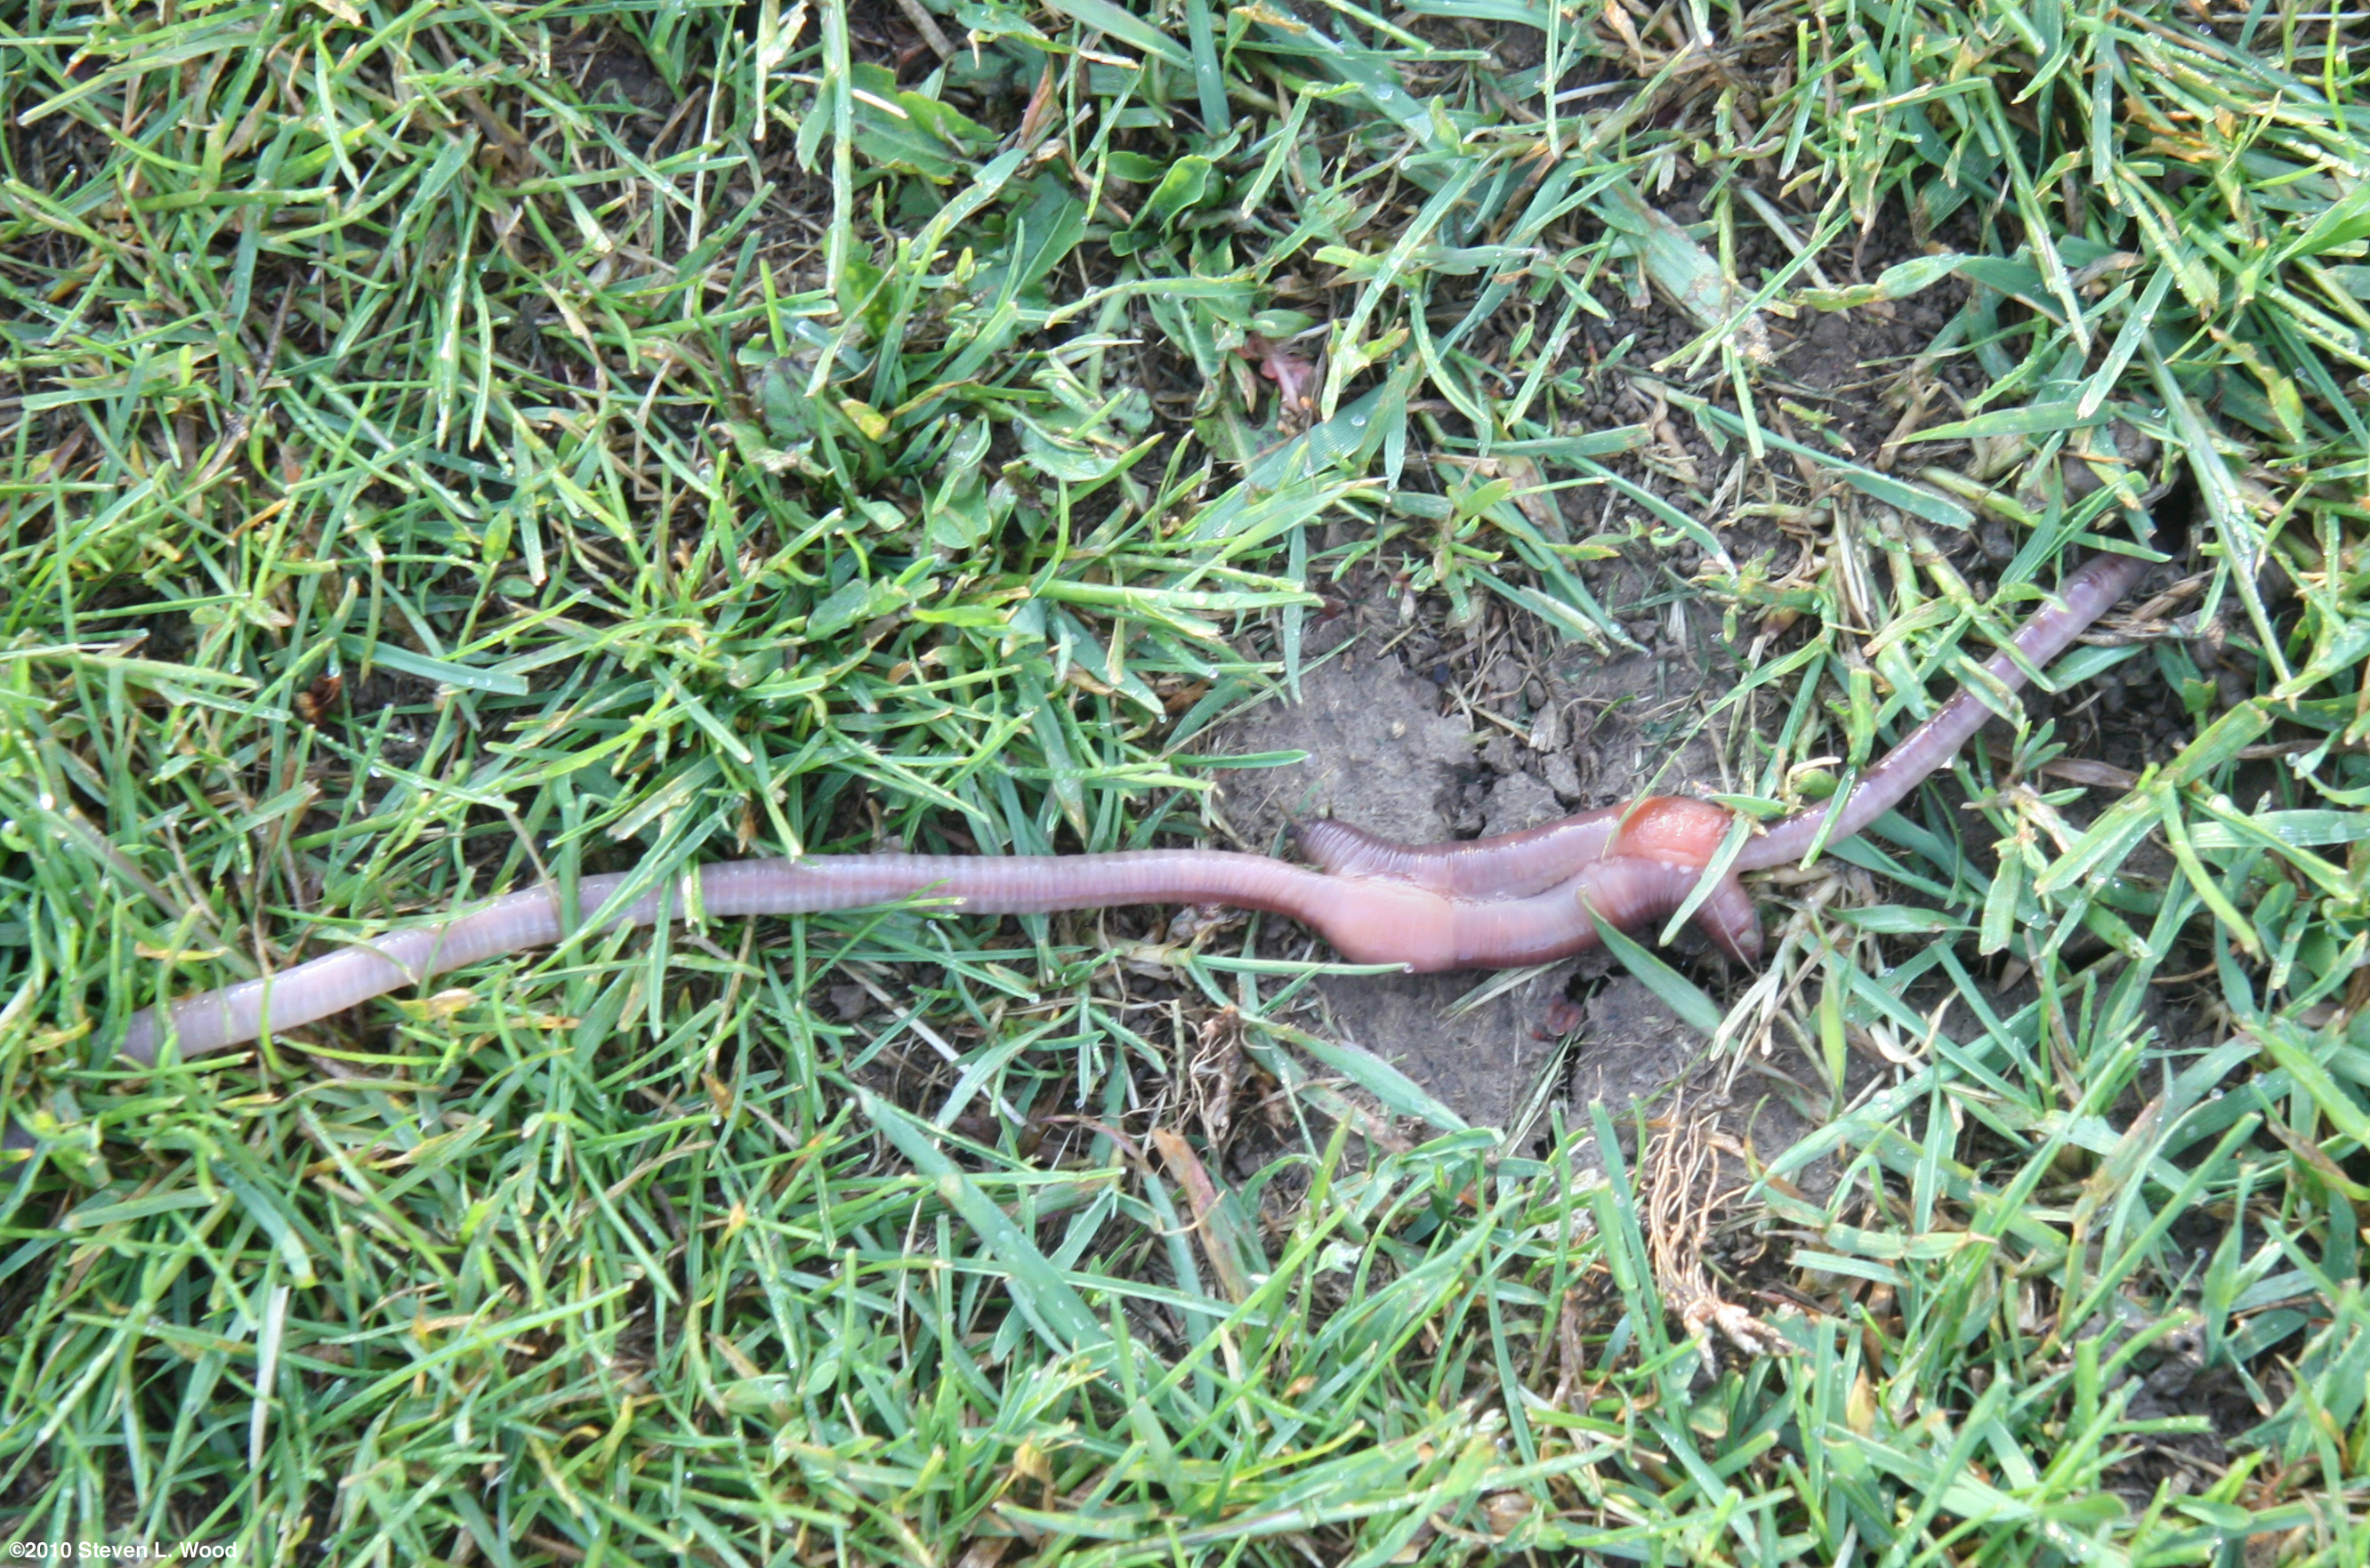 Earthworms mating